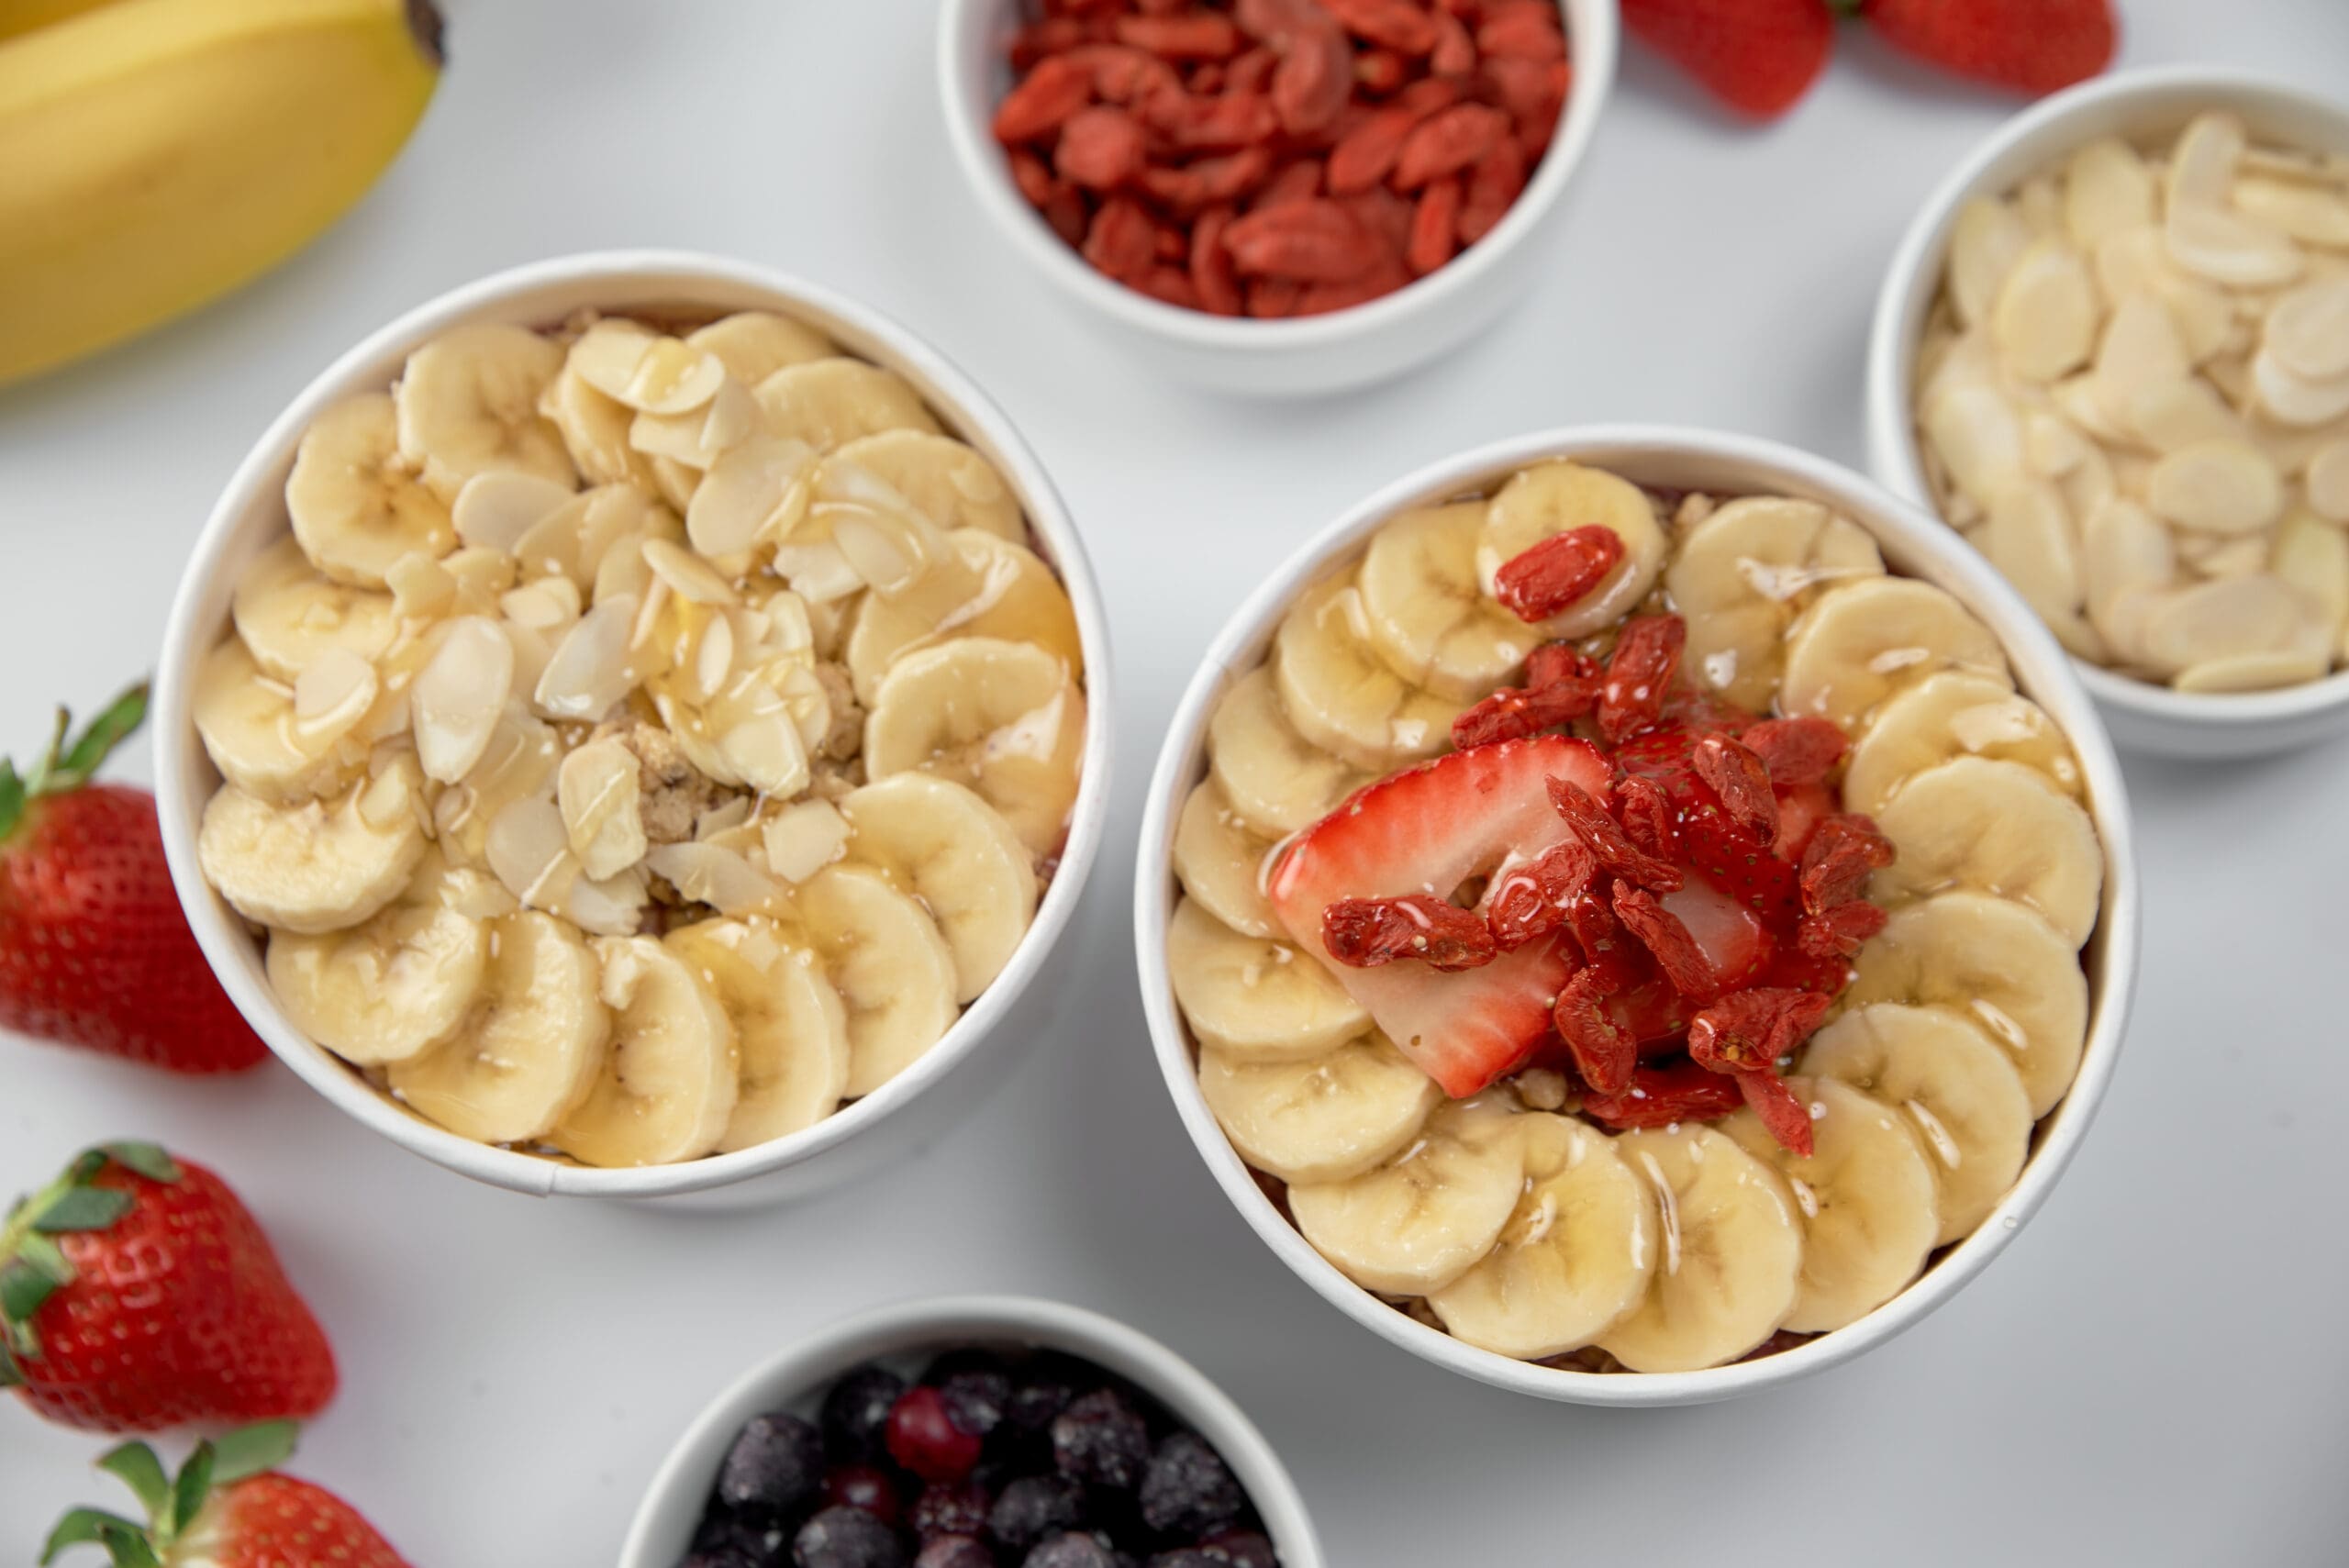 Fruit-topped Vitality Bowls and healthy eats in Redding, CA